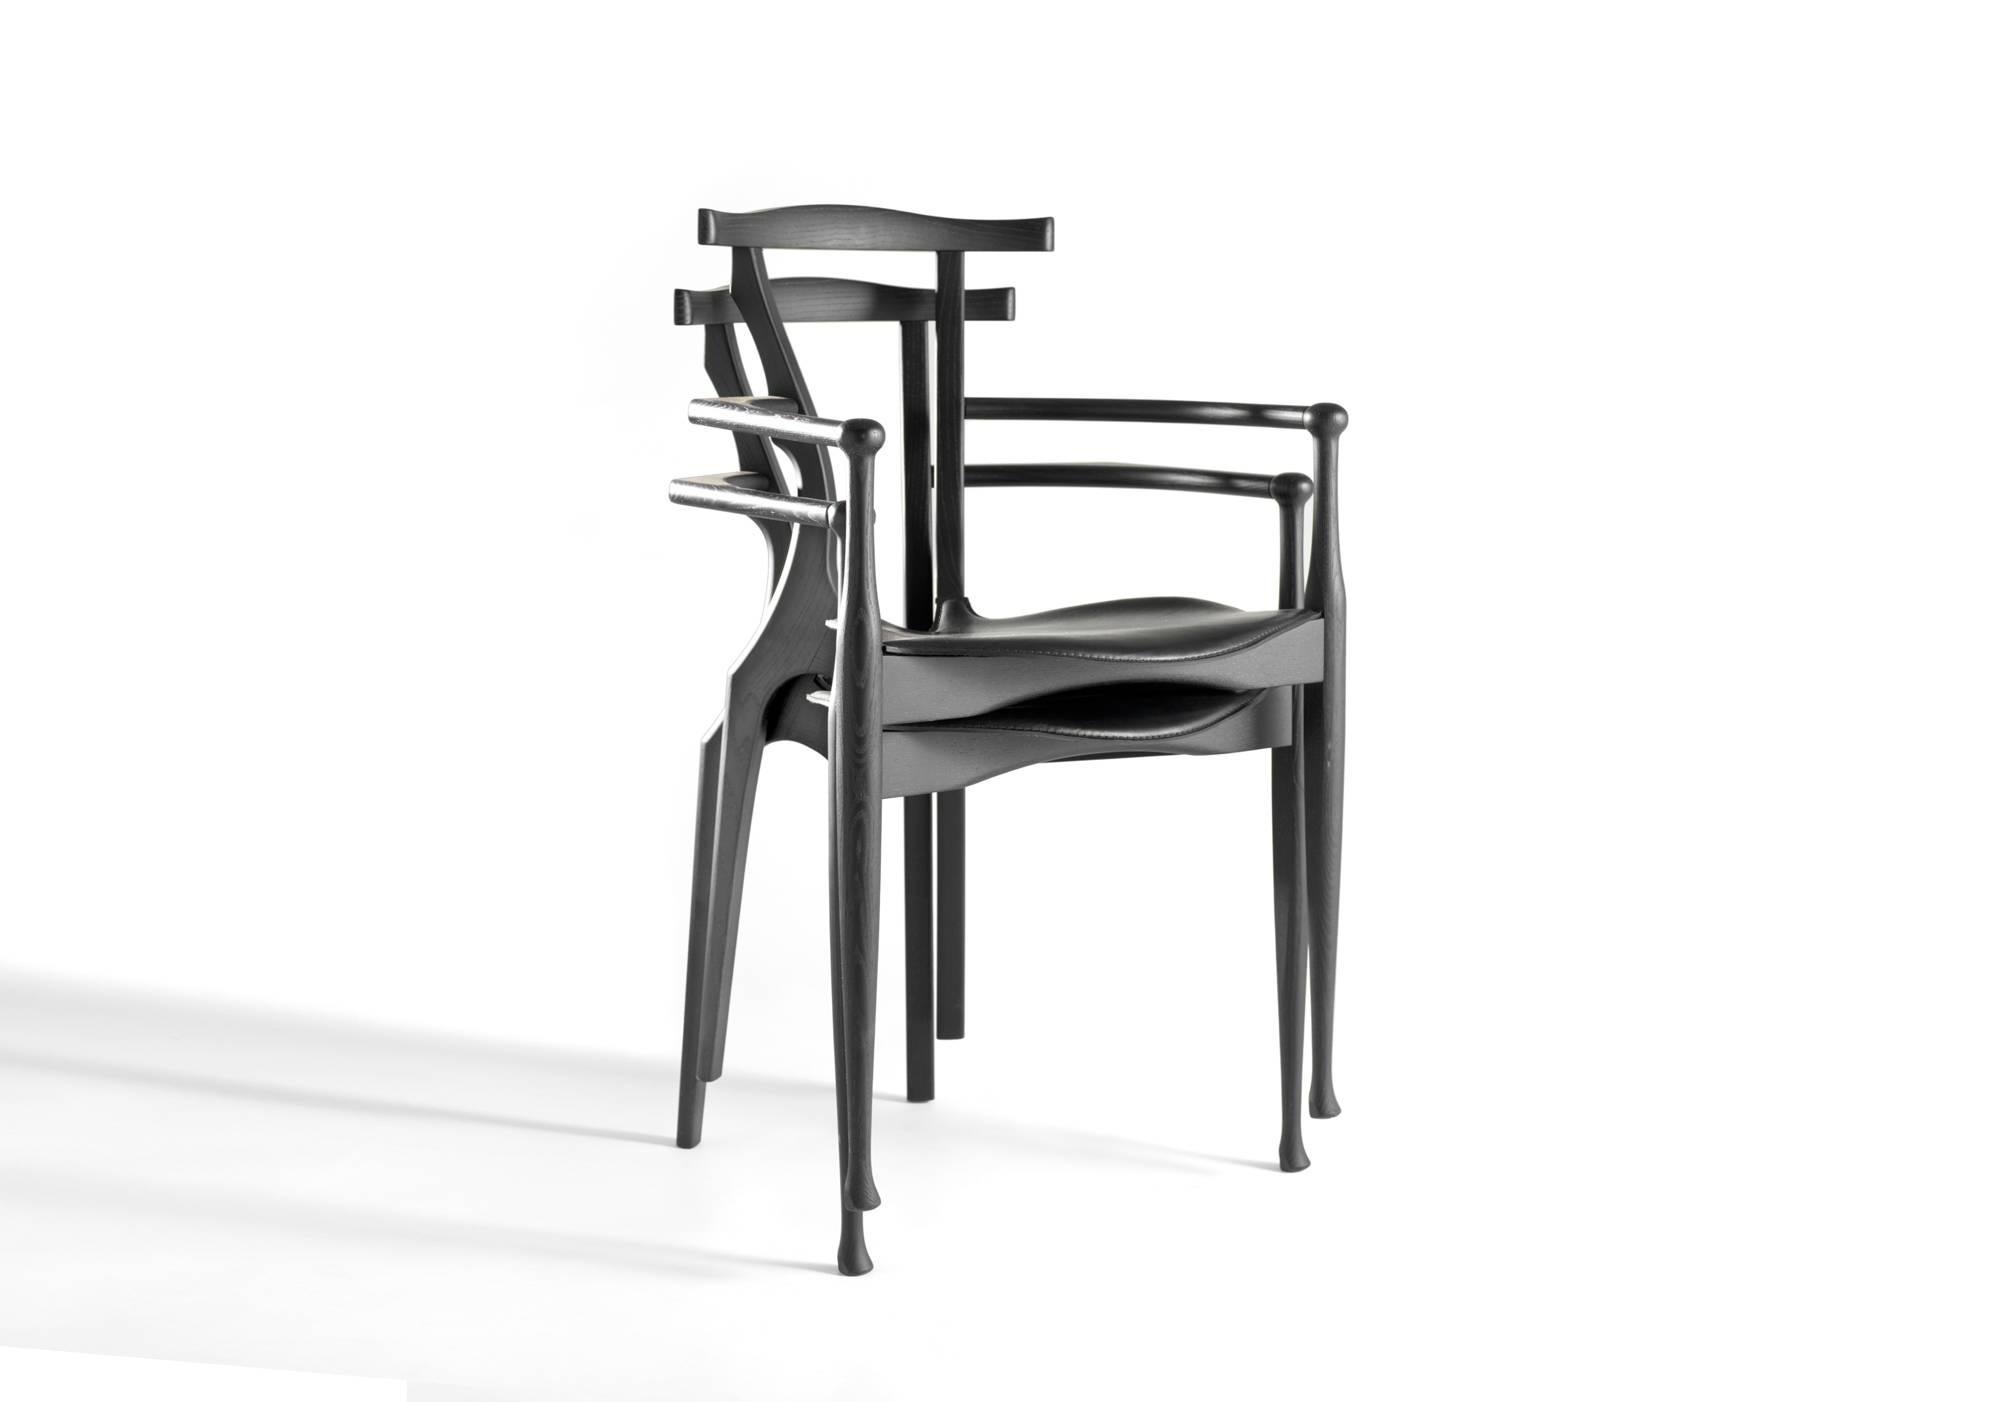 The Gaulino Easy Chair is the natural progression from the iconic Gaulino. 
It retains the functional artistry of the Gaulino while sitting lighter, wider, 
and lower. BD introduced the Easy chair as an alternative to the Gaulino. 
The lowered